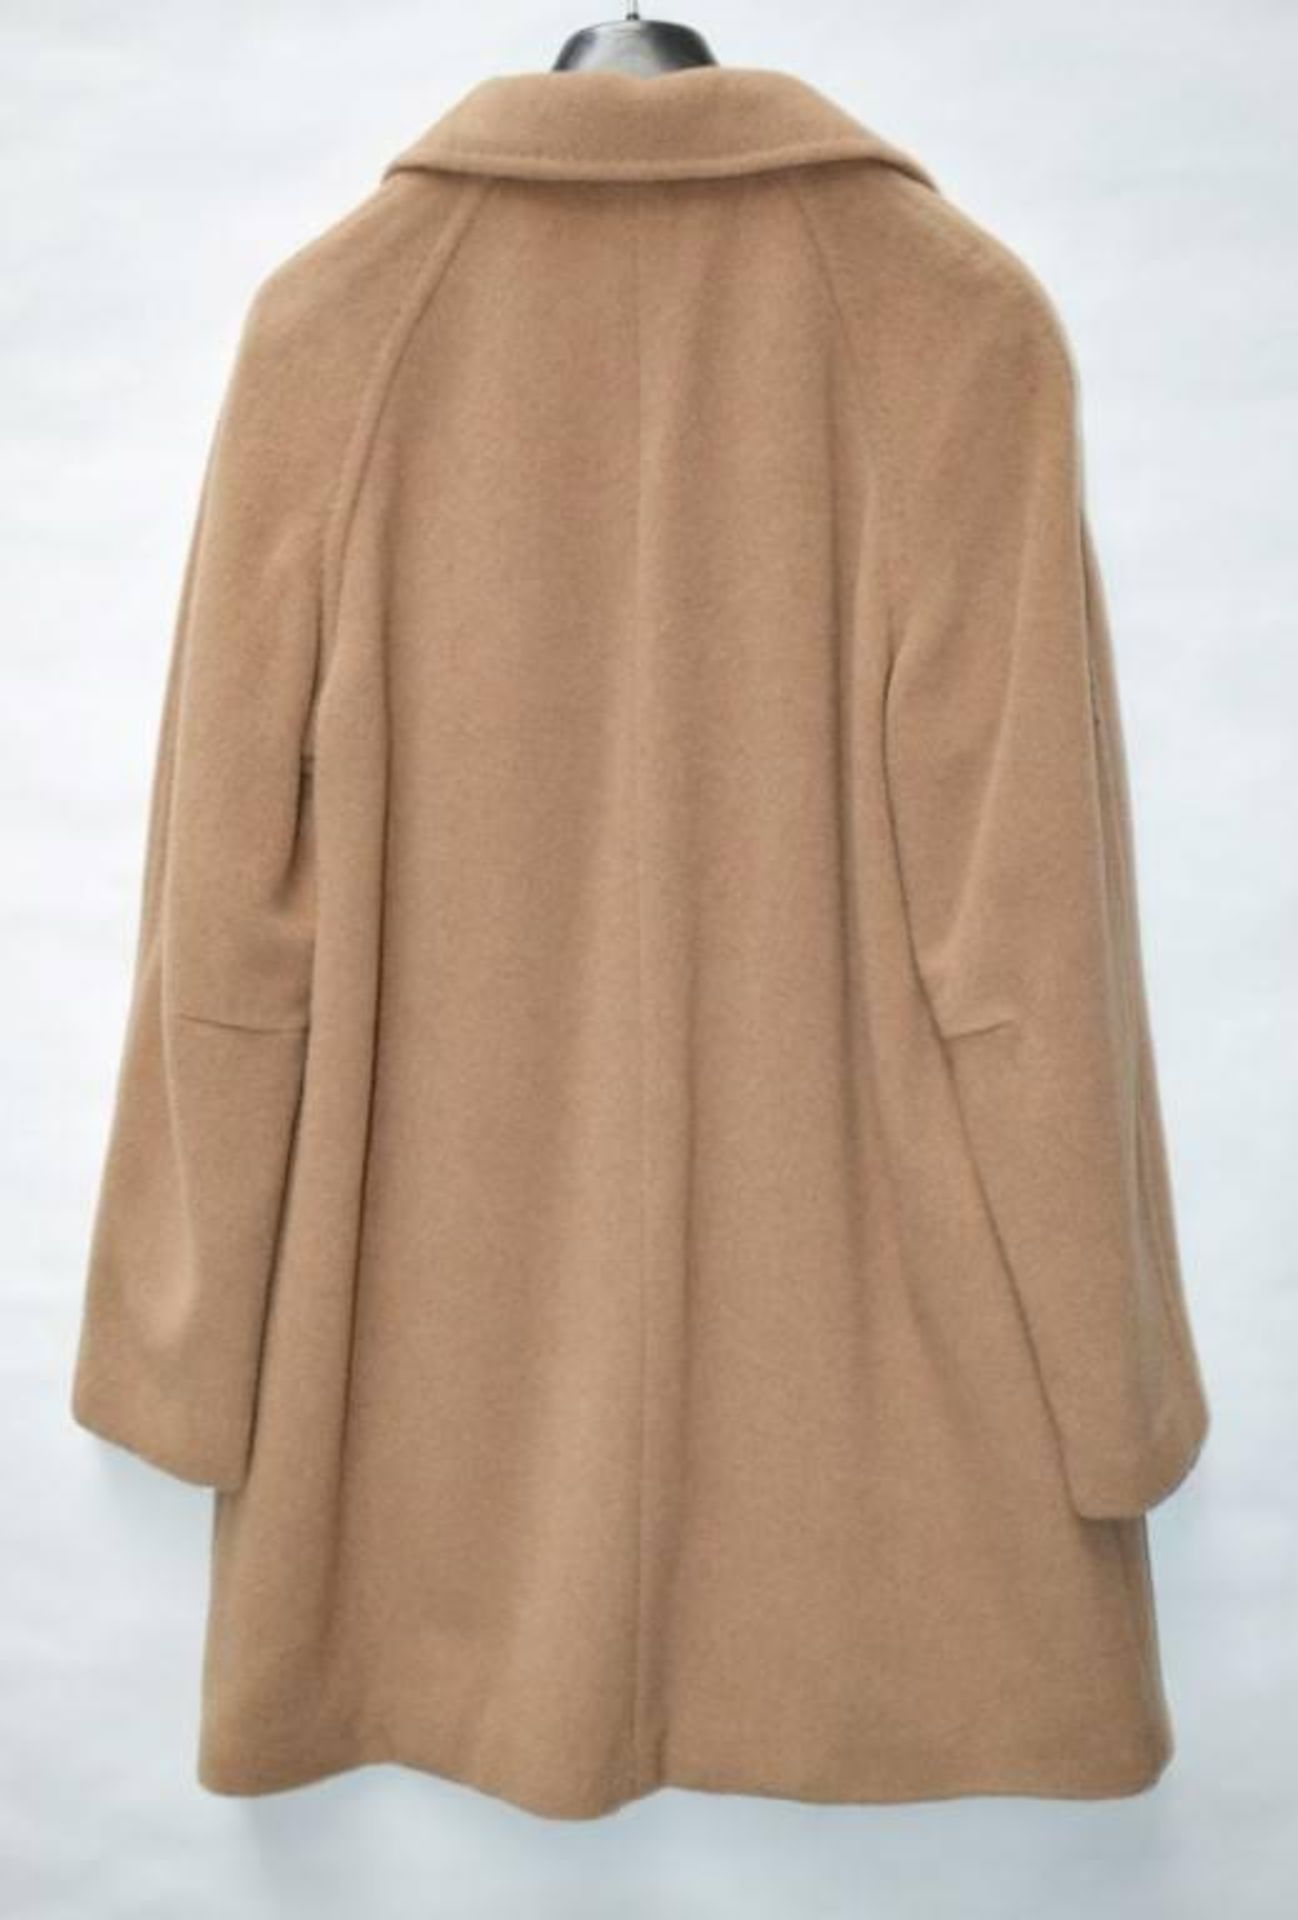 1 x Steilmann Kirsten Womens Knee-length Wool Blend Coat - Features False Pockets To Front - Size 12 - Image 3 of 3